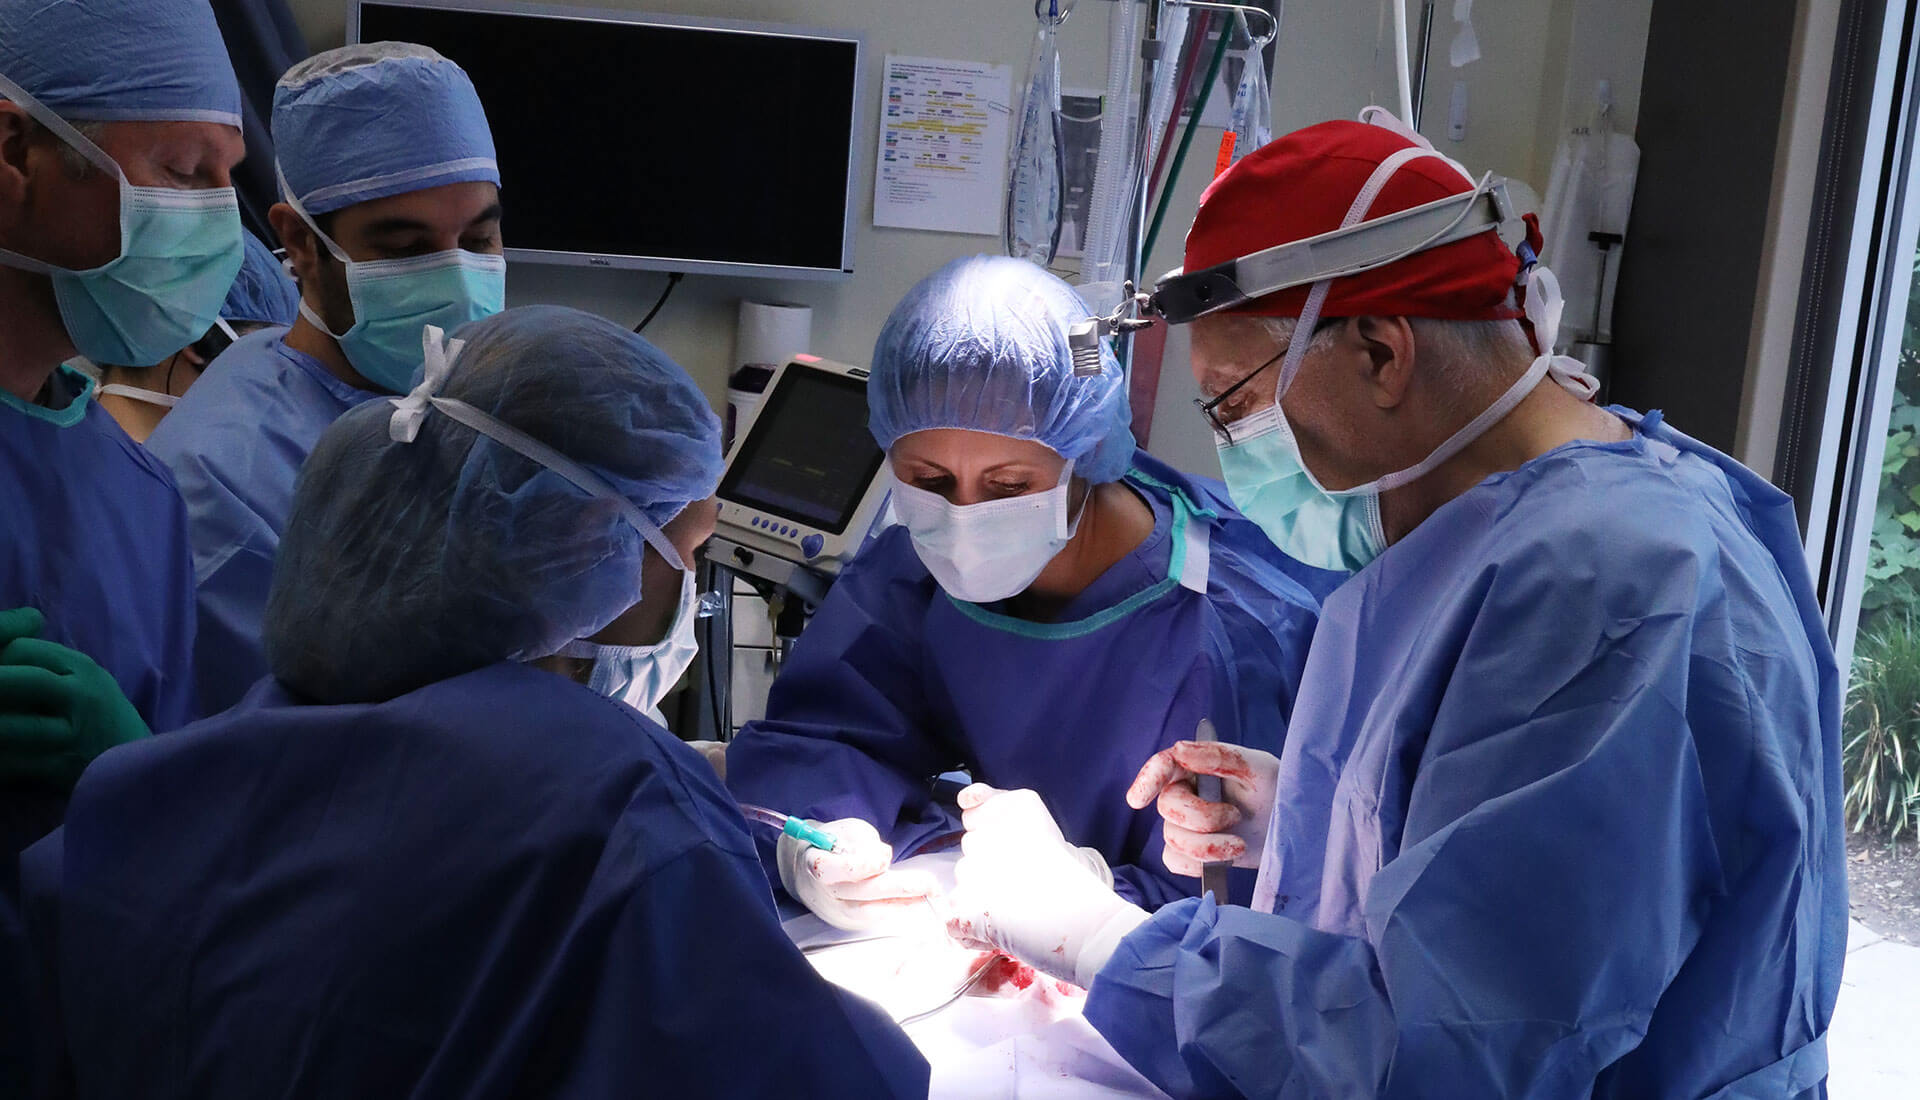 A team of surgeons in blue gowns operate on a pet under bright lights.